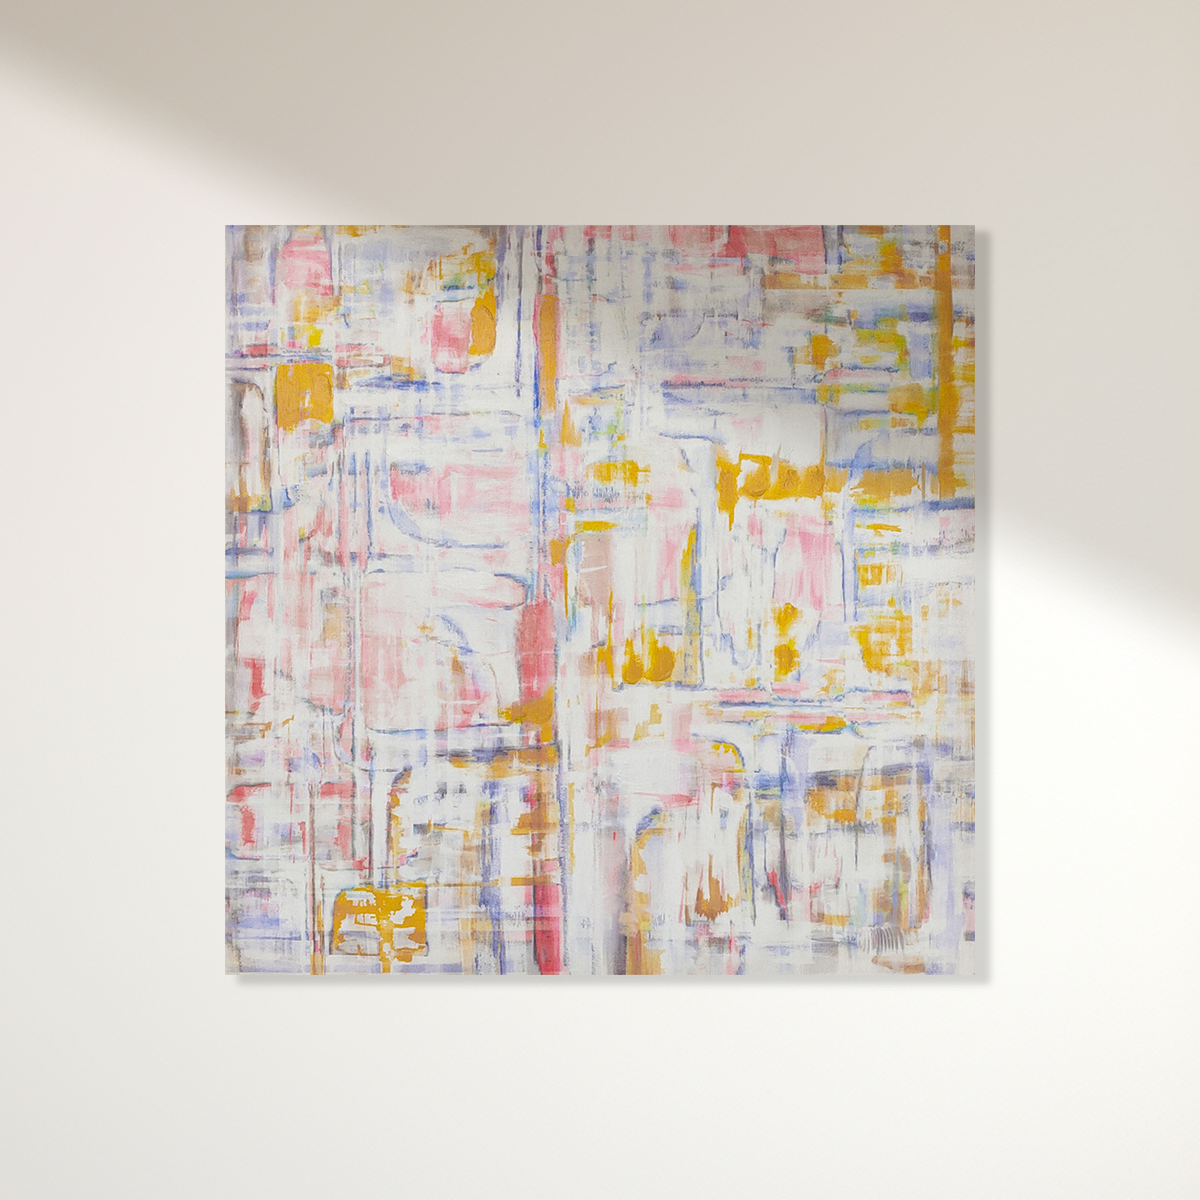 Abstract textured wall art affordable oil painting unframed colourful square on stretched canvas